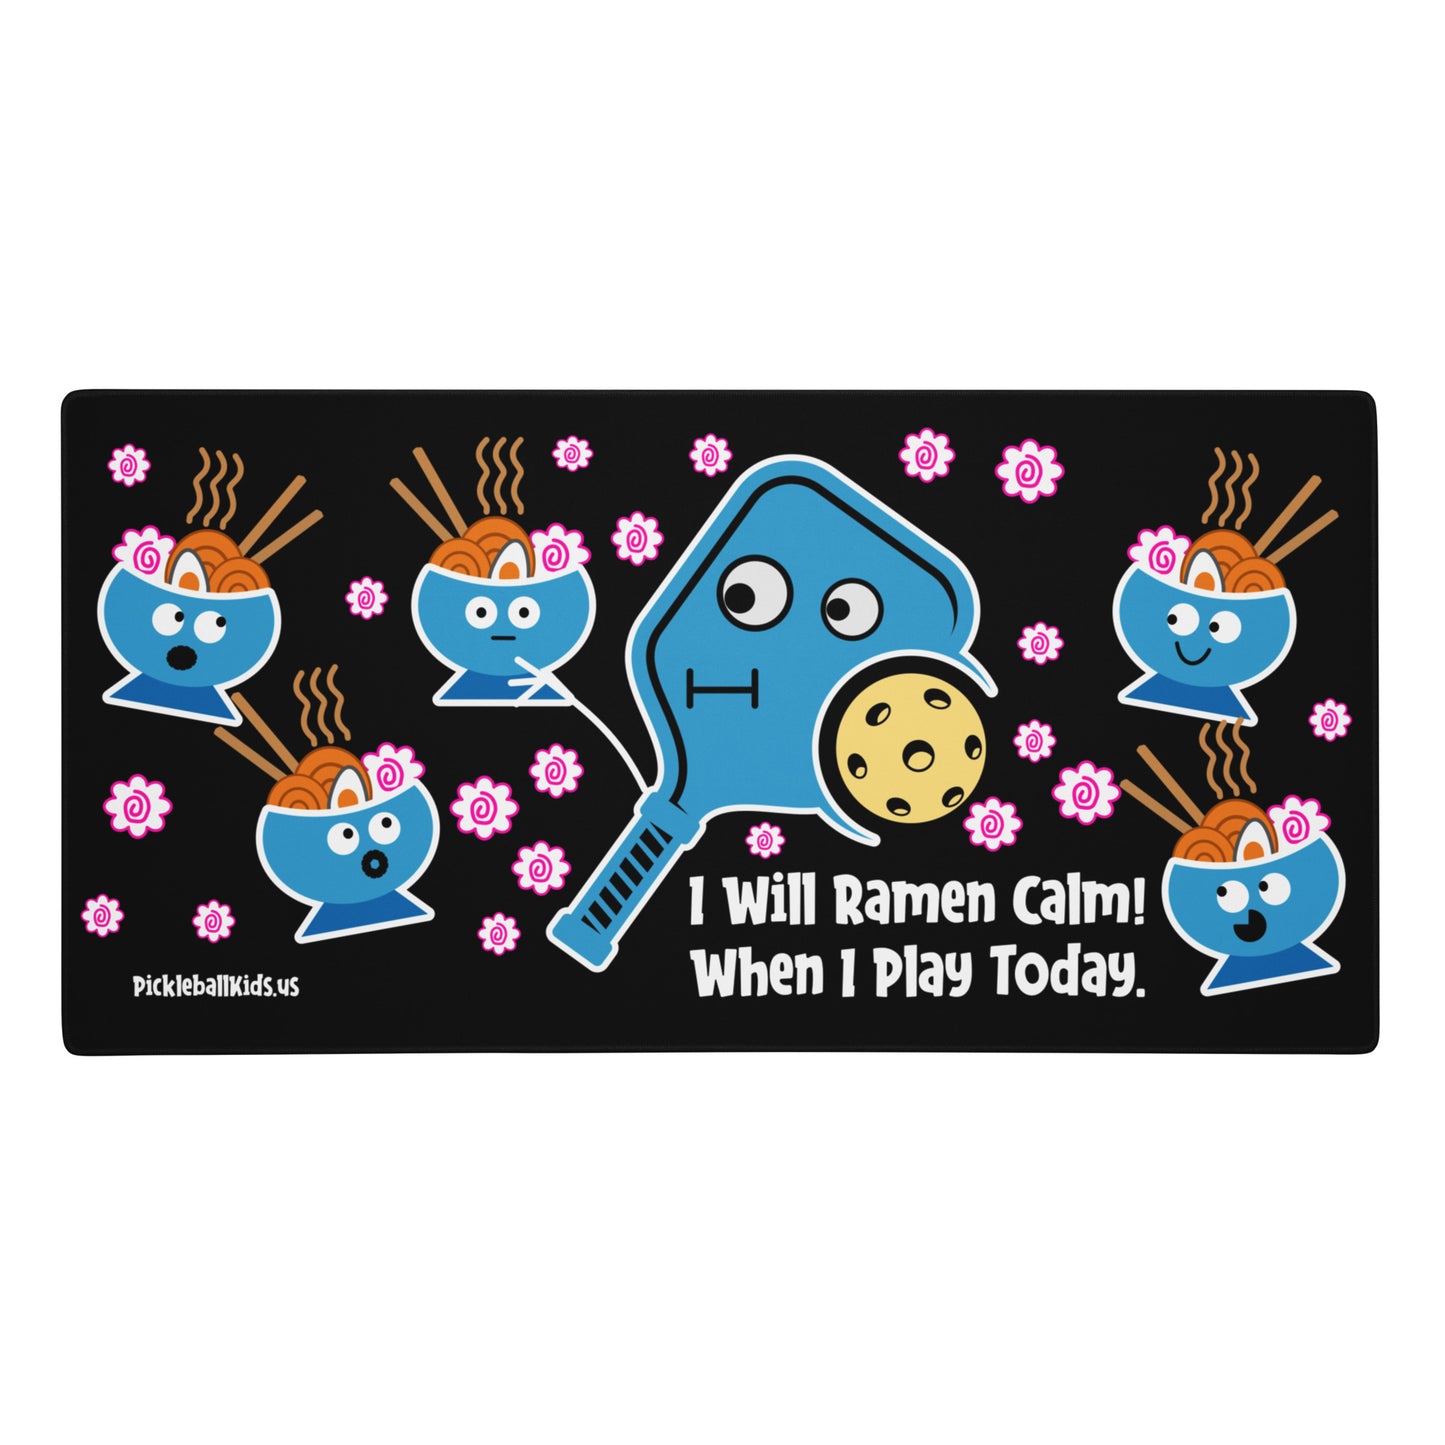 Fun Pickleball Pun: "I Will Ramen Calm! When I Play Today.", Large Gaming Mouse Pad